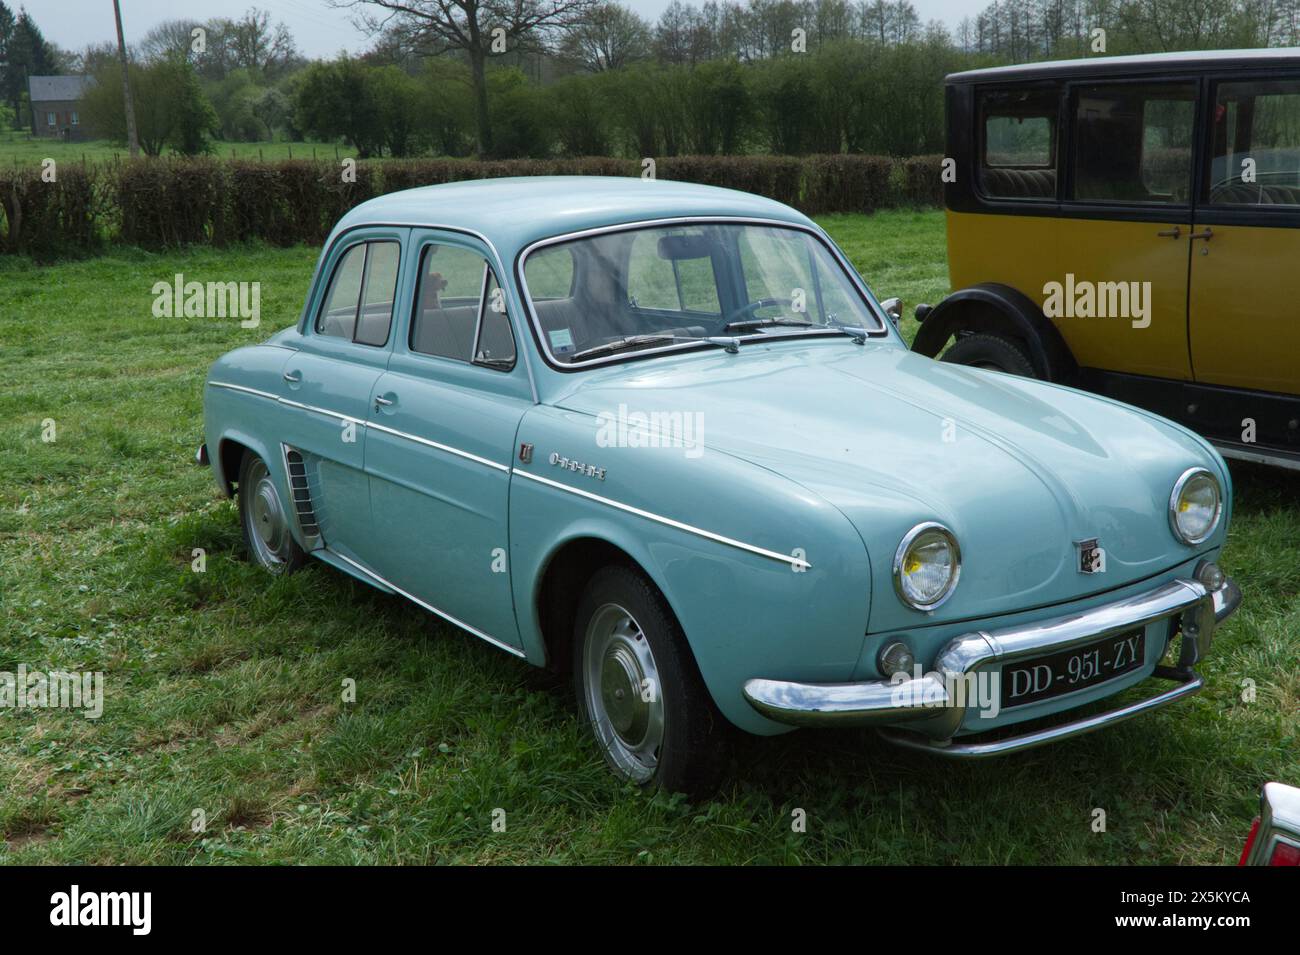 Fifties sixties Renault Ondine turqouise on show in France Stock Photo